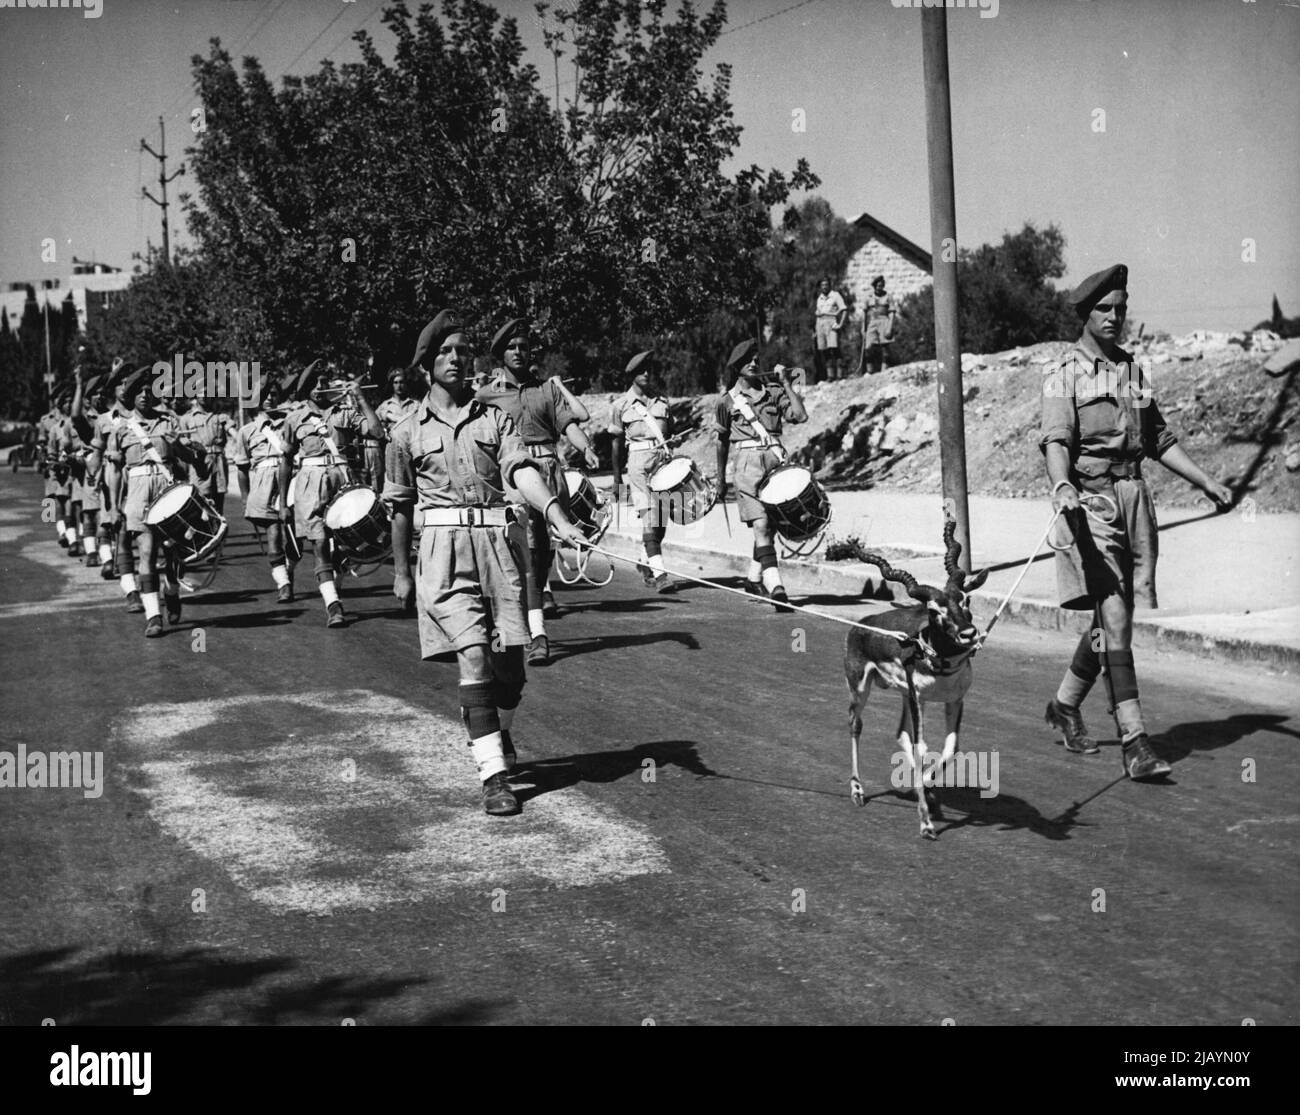 'Bobbie' Leads The Royal Warwicks In Jerusalem -- Bobbie, the black duck Mascot, of the Royal Warwickshire Regiment now stationed in Jerusalem, Marches proudly in step at the head of the Regimental band, along King George Avenue, Jerusalem. He is held on lead by Private John Poolton from Spring Hill, Birmingham, (left), and Private William Hammond from King standing, Birmingham. Before joining the British Army, Bobbie was at the Cairo Zoo. October 15, 1947. (Photo by Associated Press Feature Photo). Stock Photo